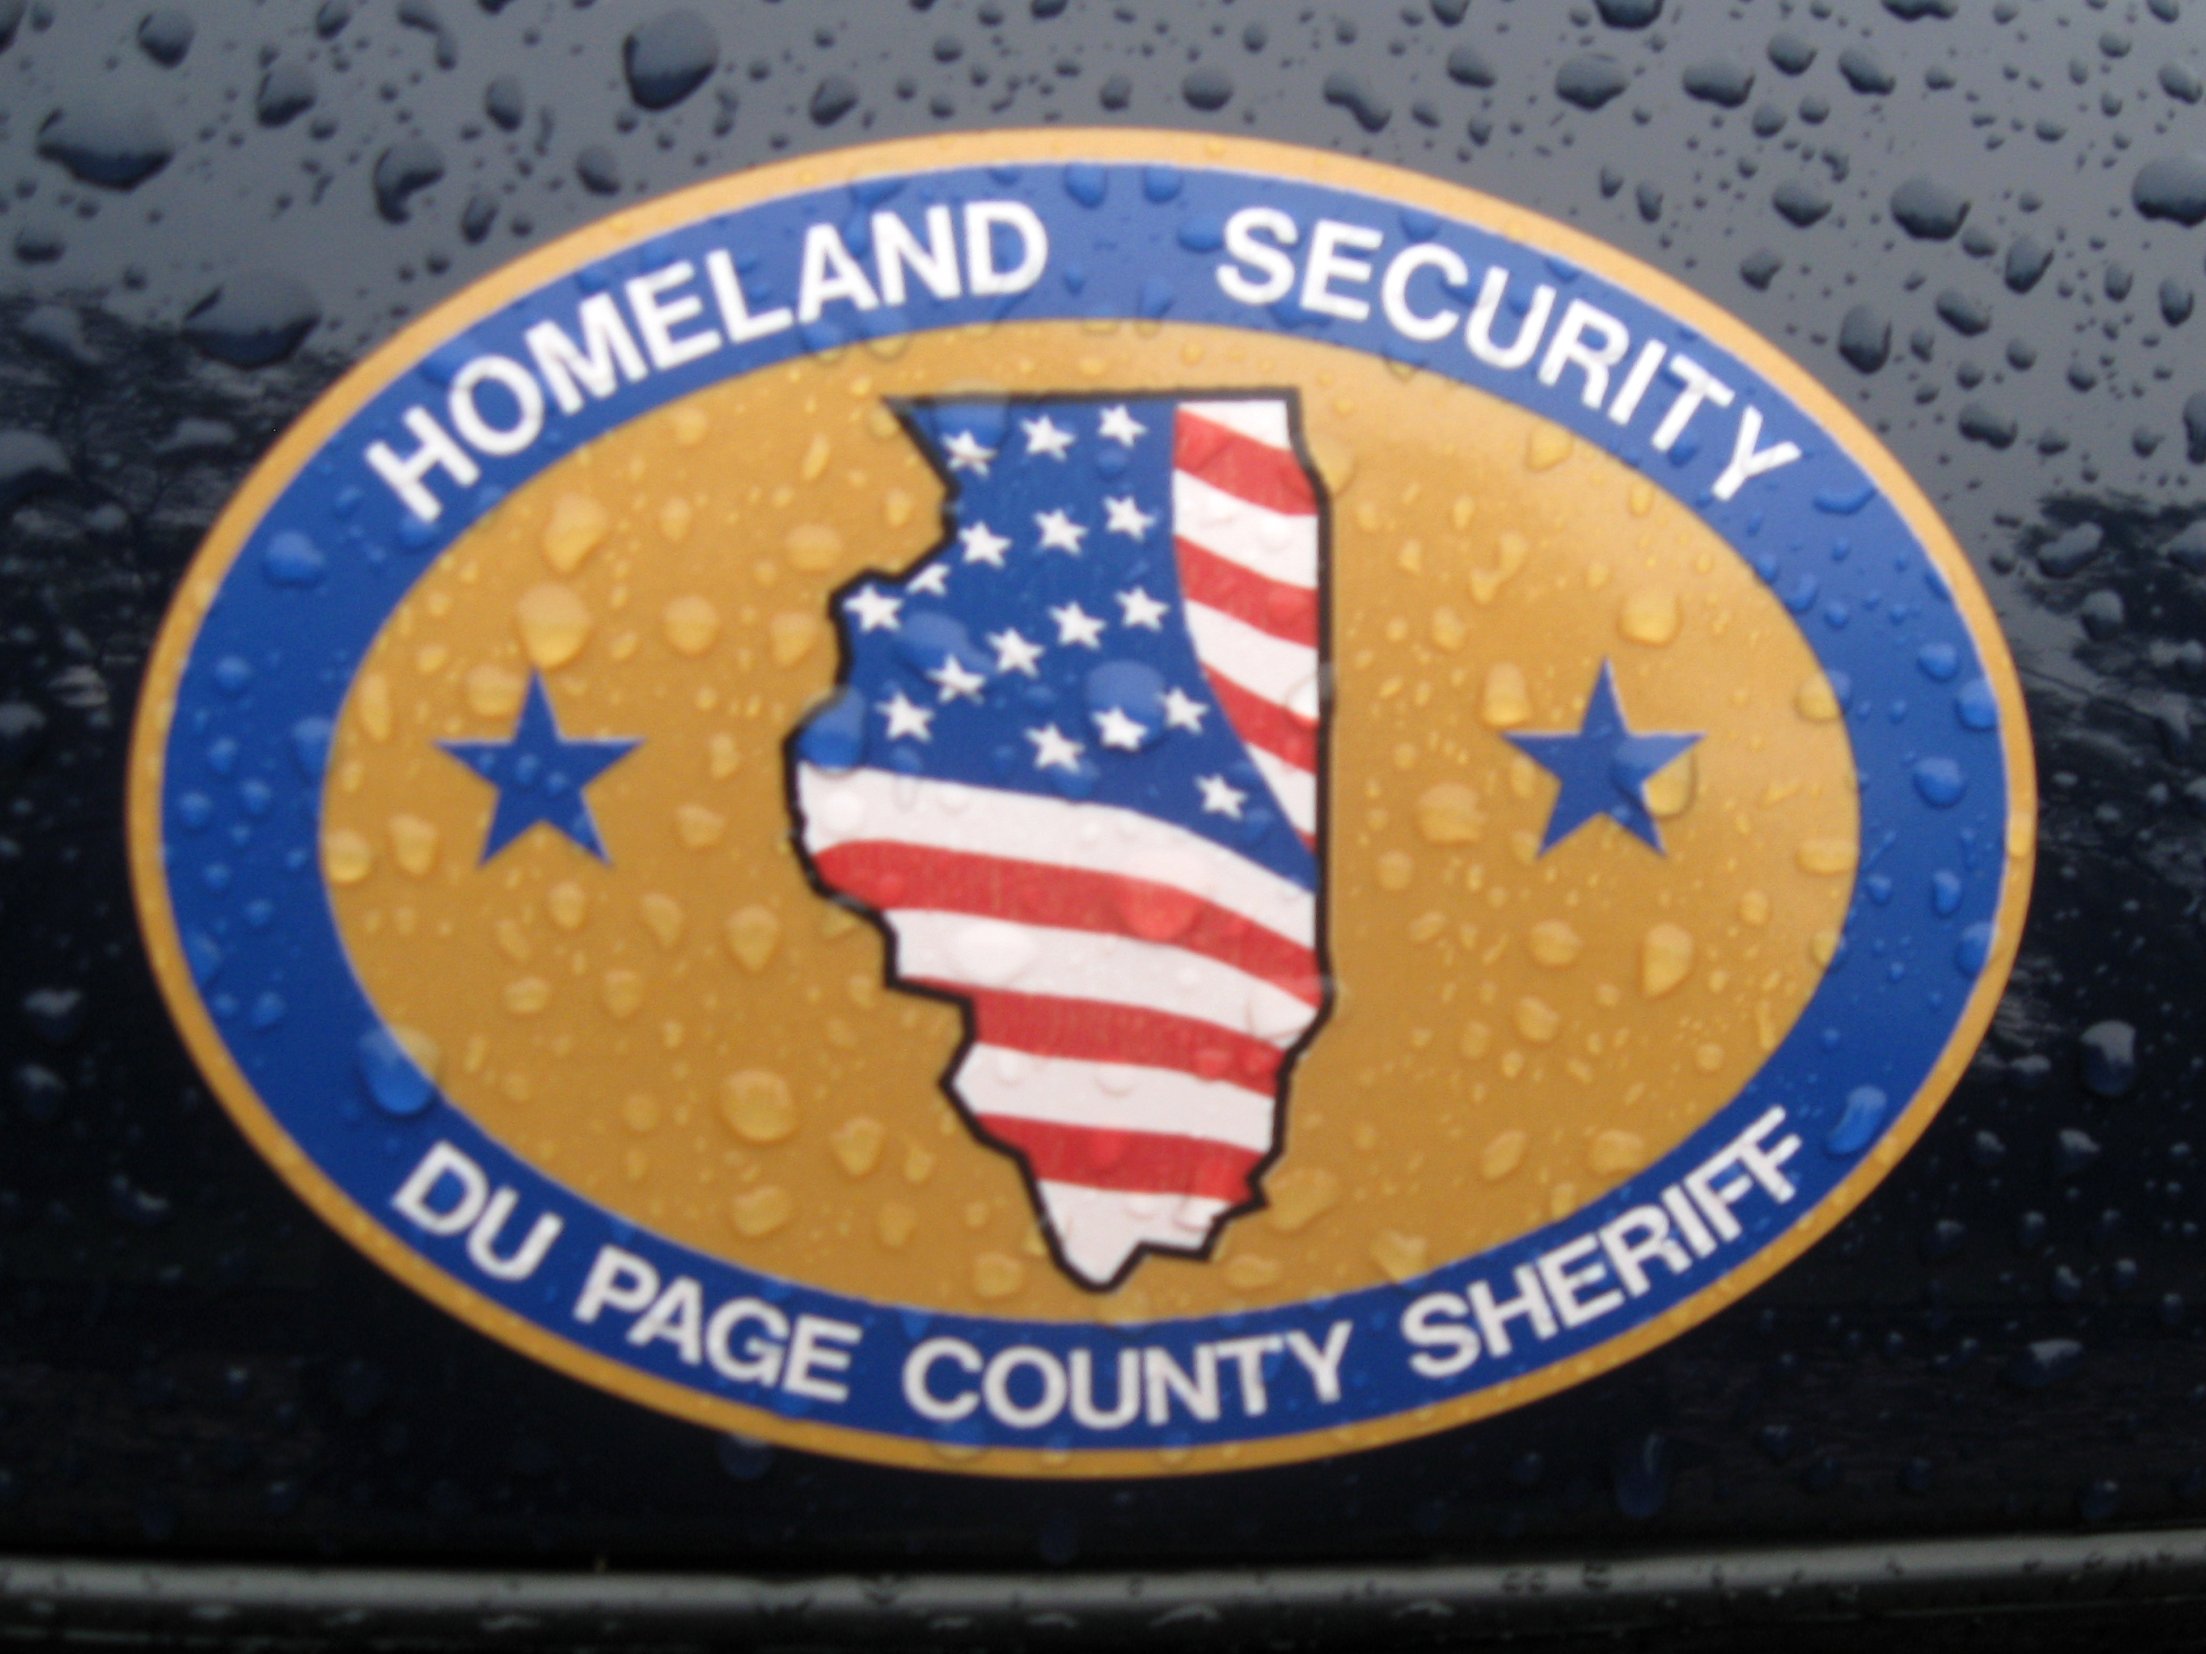 IL - Dupage County Sheriff Department: Homeland Security Decal